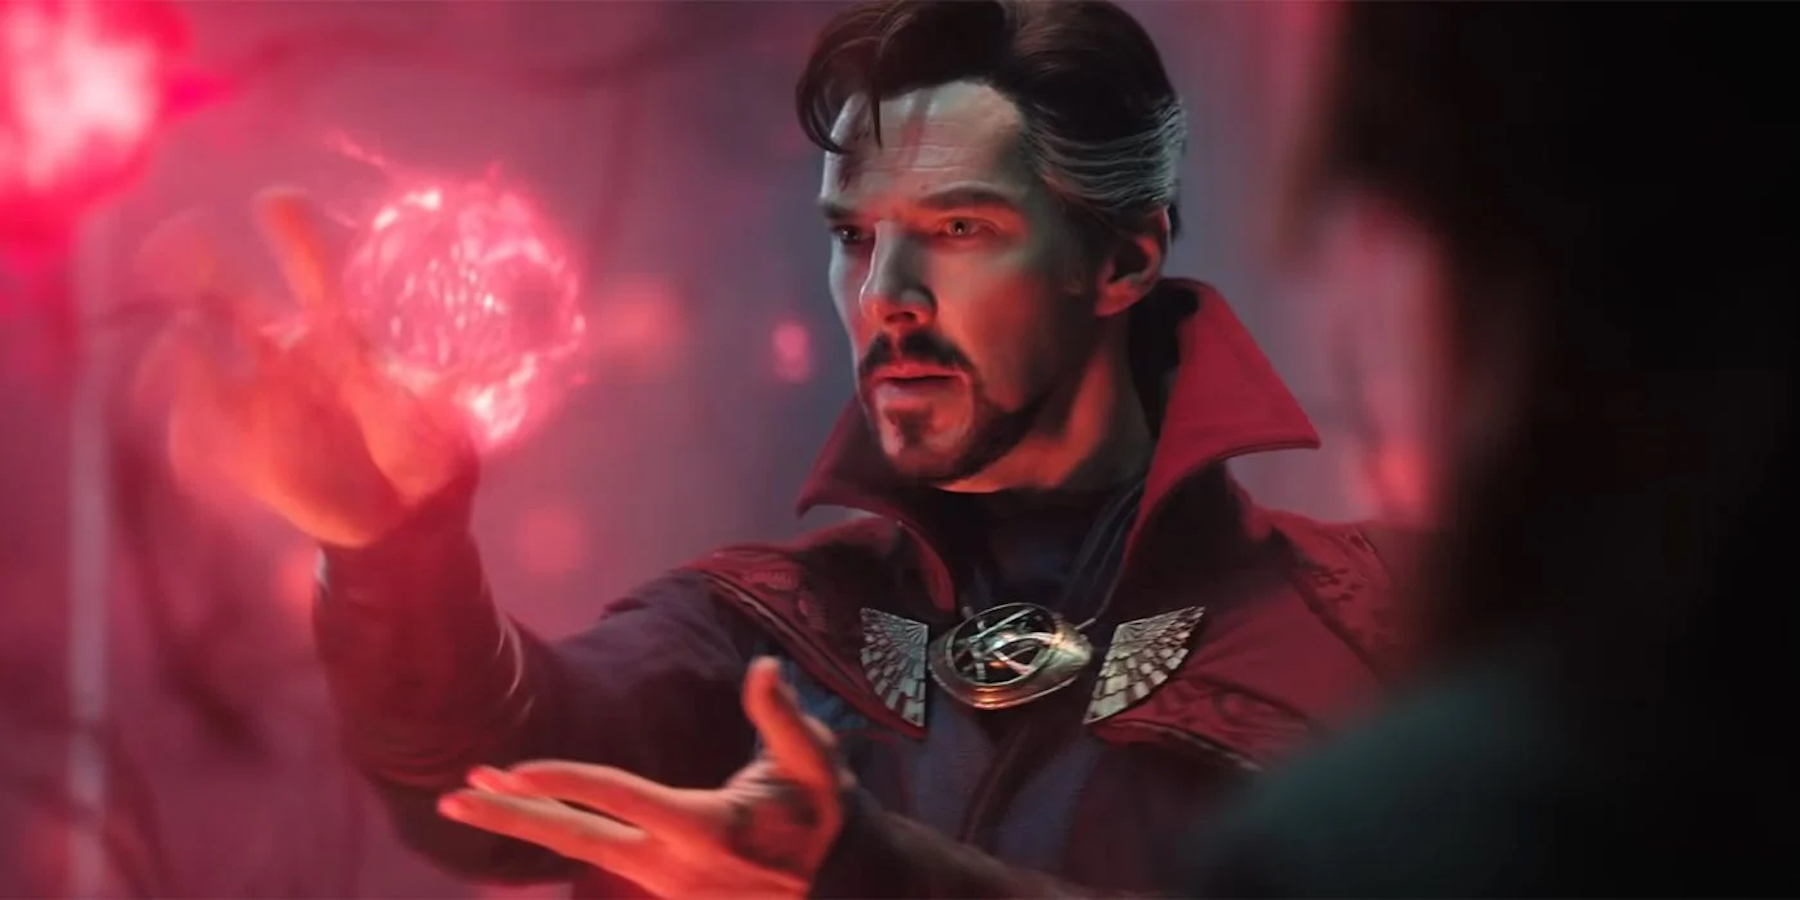 Doctor Strange - played by Benedict Cumberbatch - intently manipulates a glowing red orb of energy.